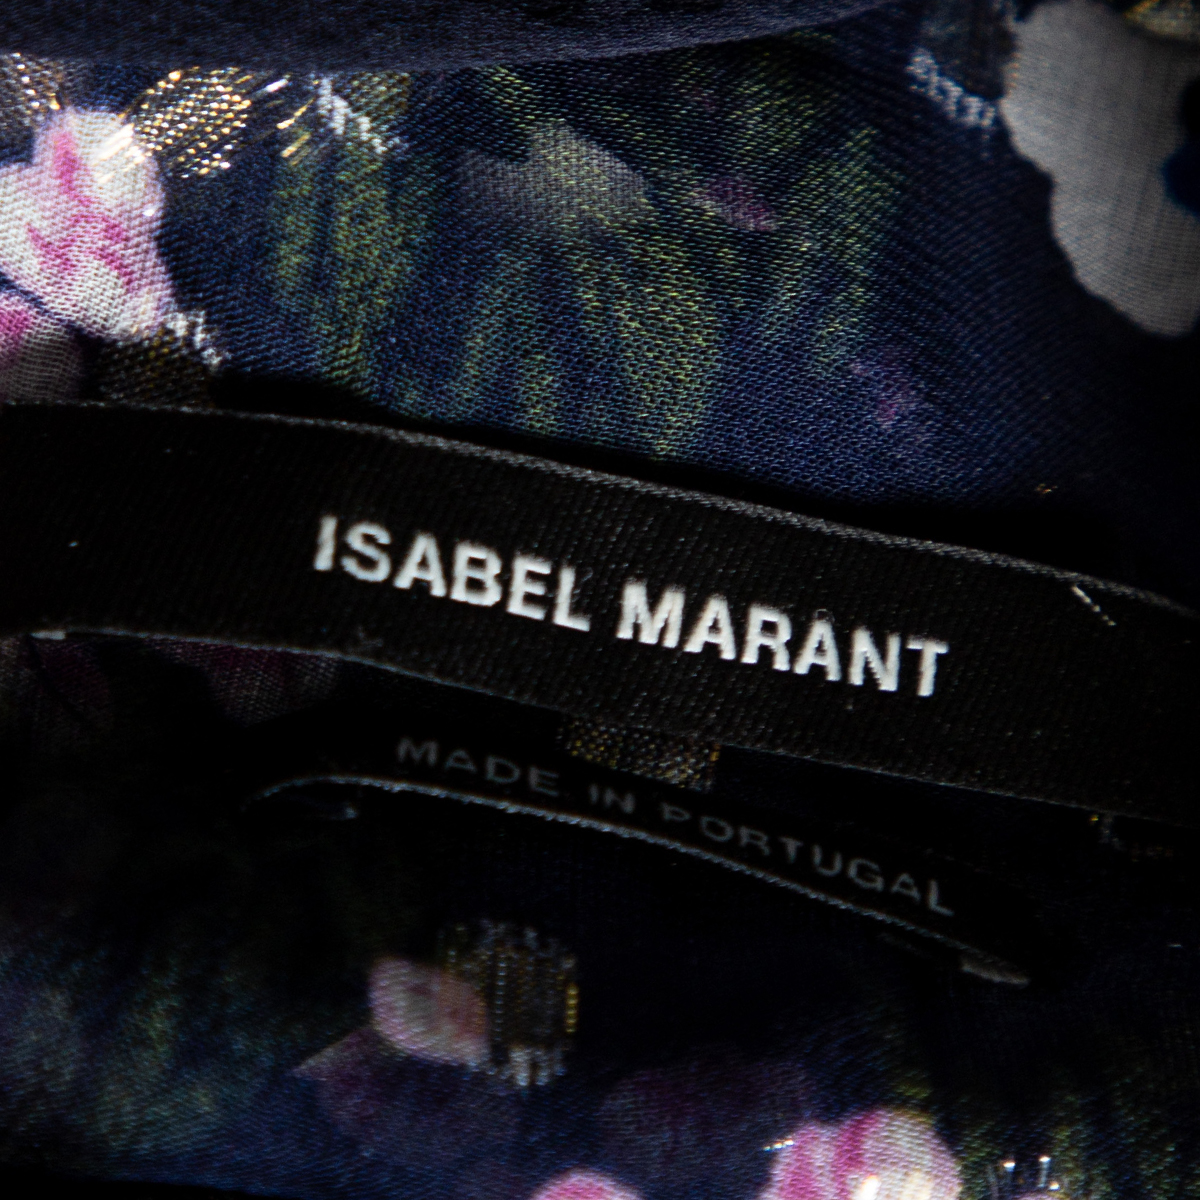 Isabel Marant Navy Blue Floral Printed Silk & Lurex Ruffle Trimmed Blouse S